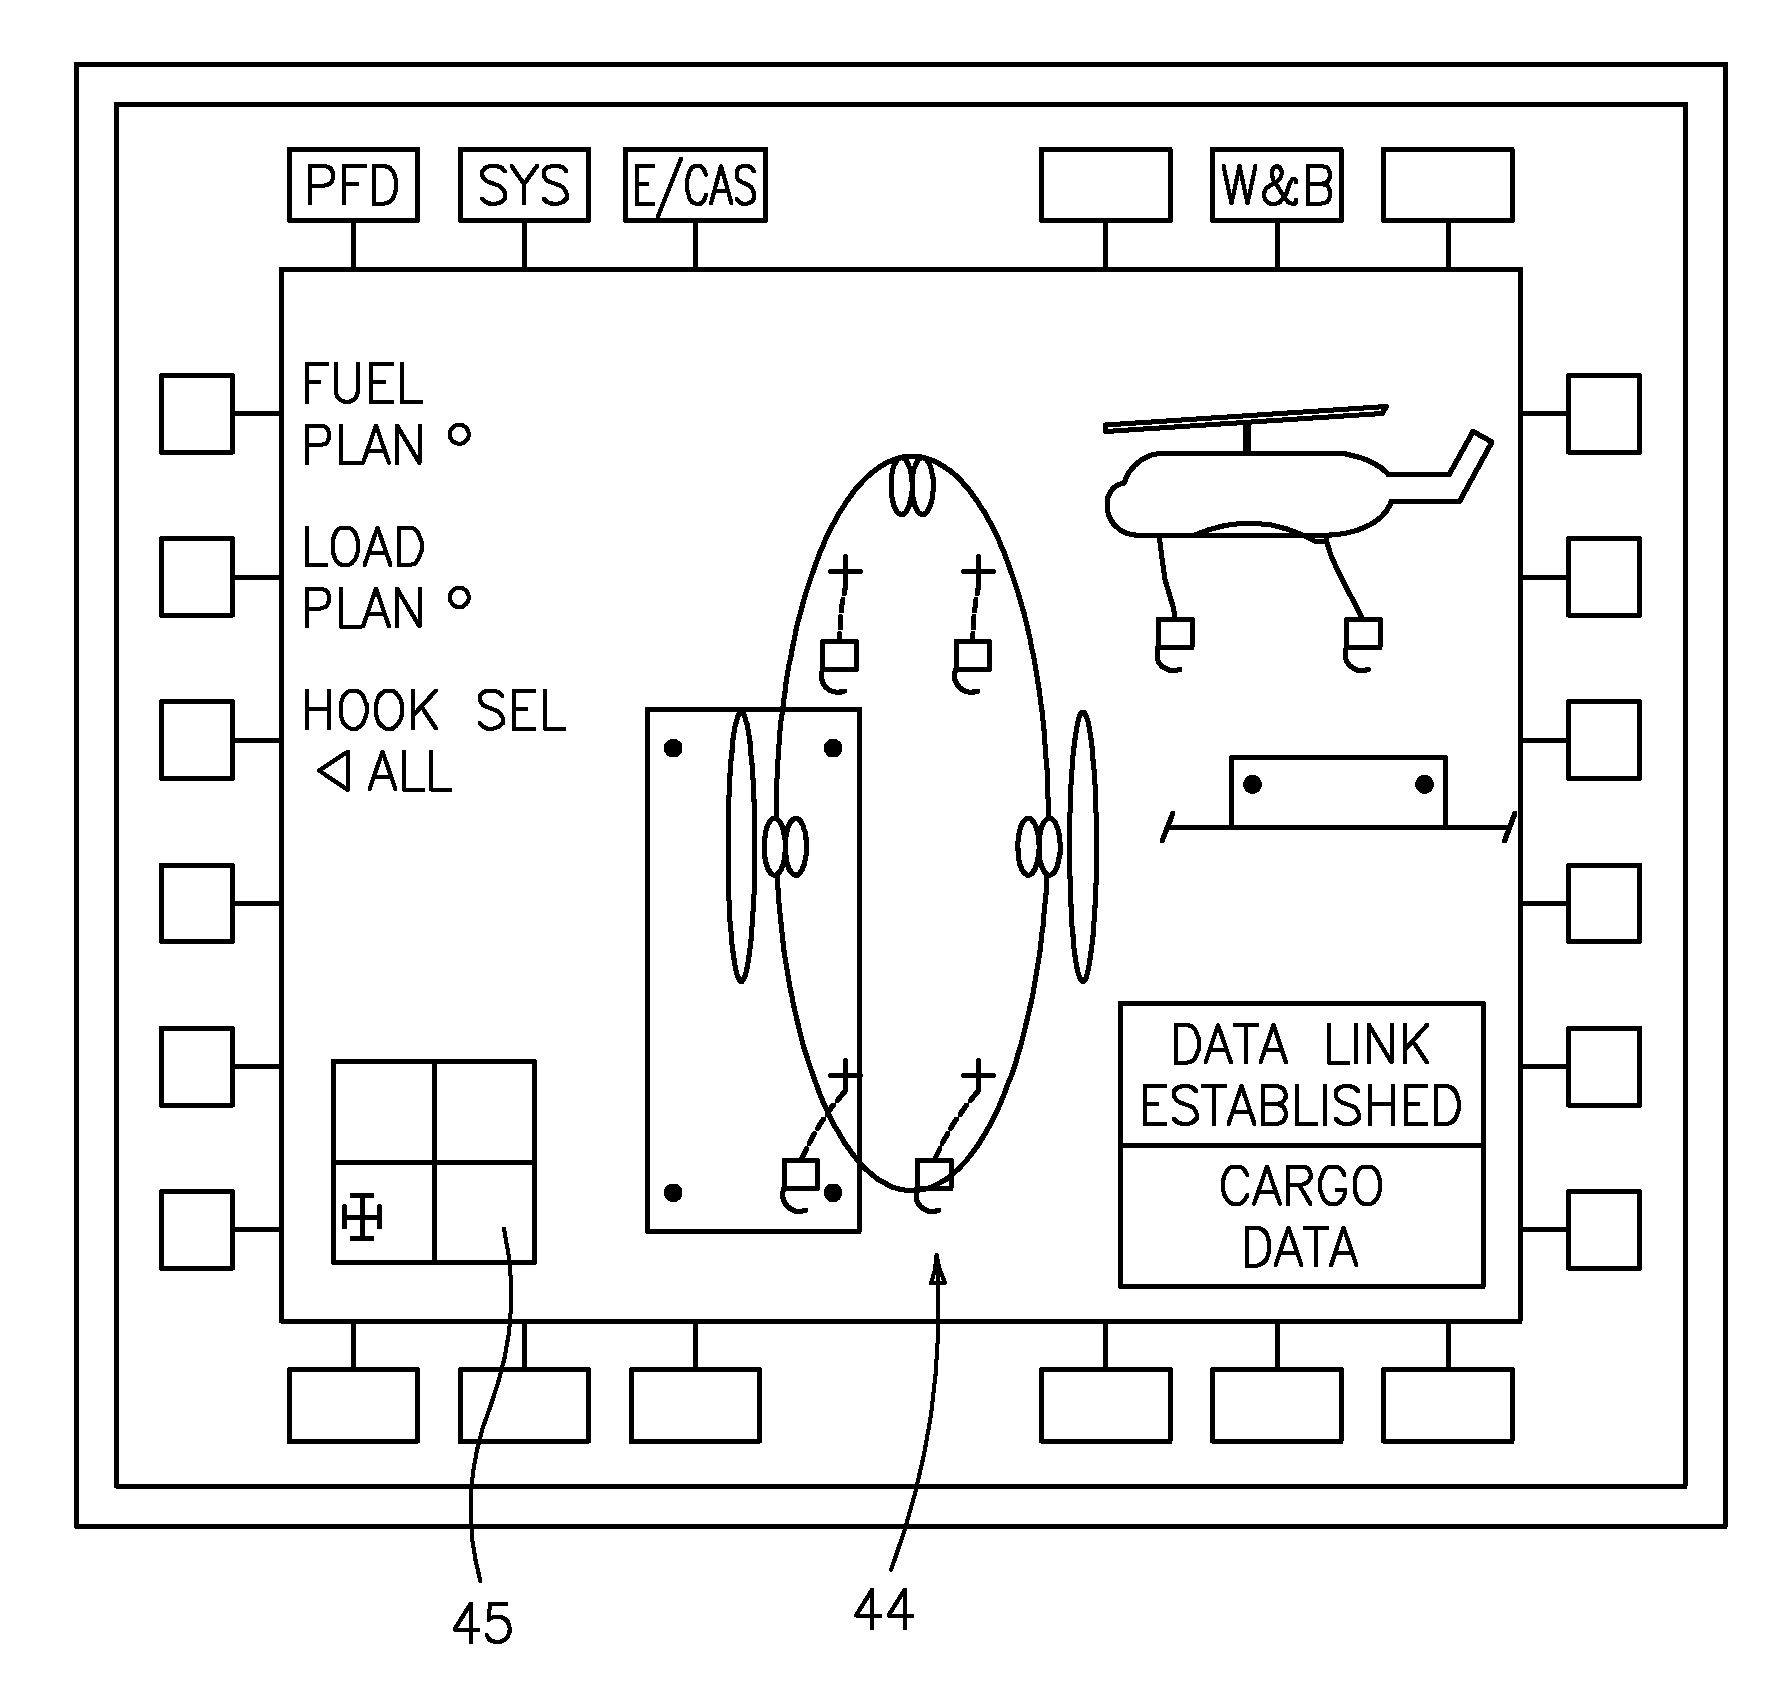 Radio frequency emitting hook system for a rotary-wing aircraft external load handling